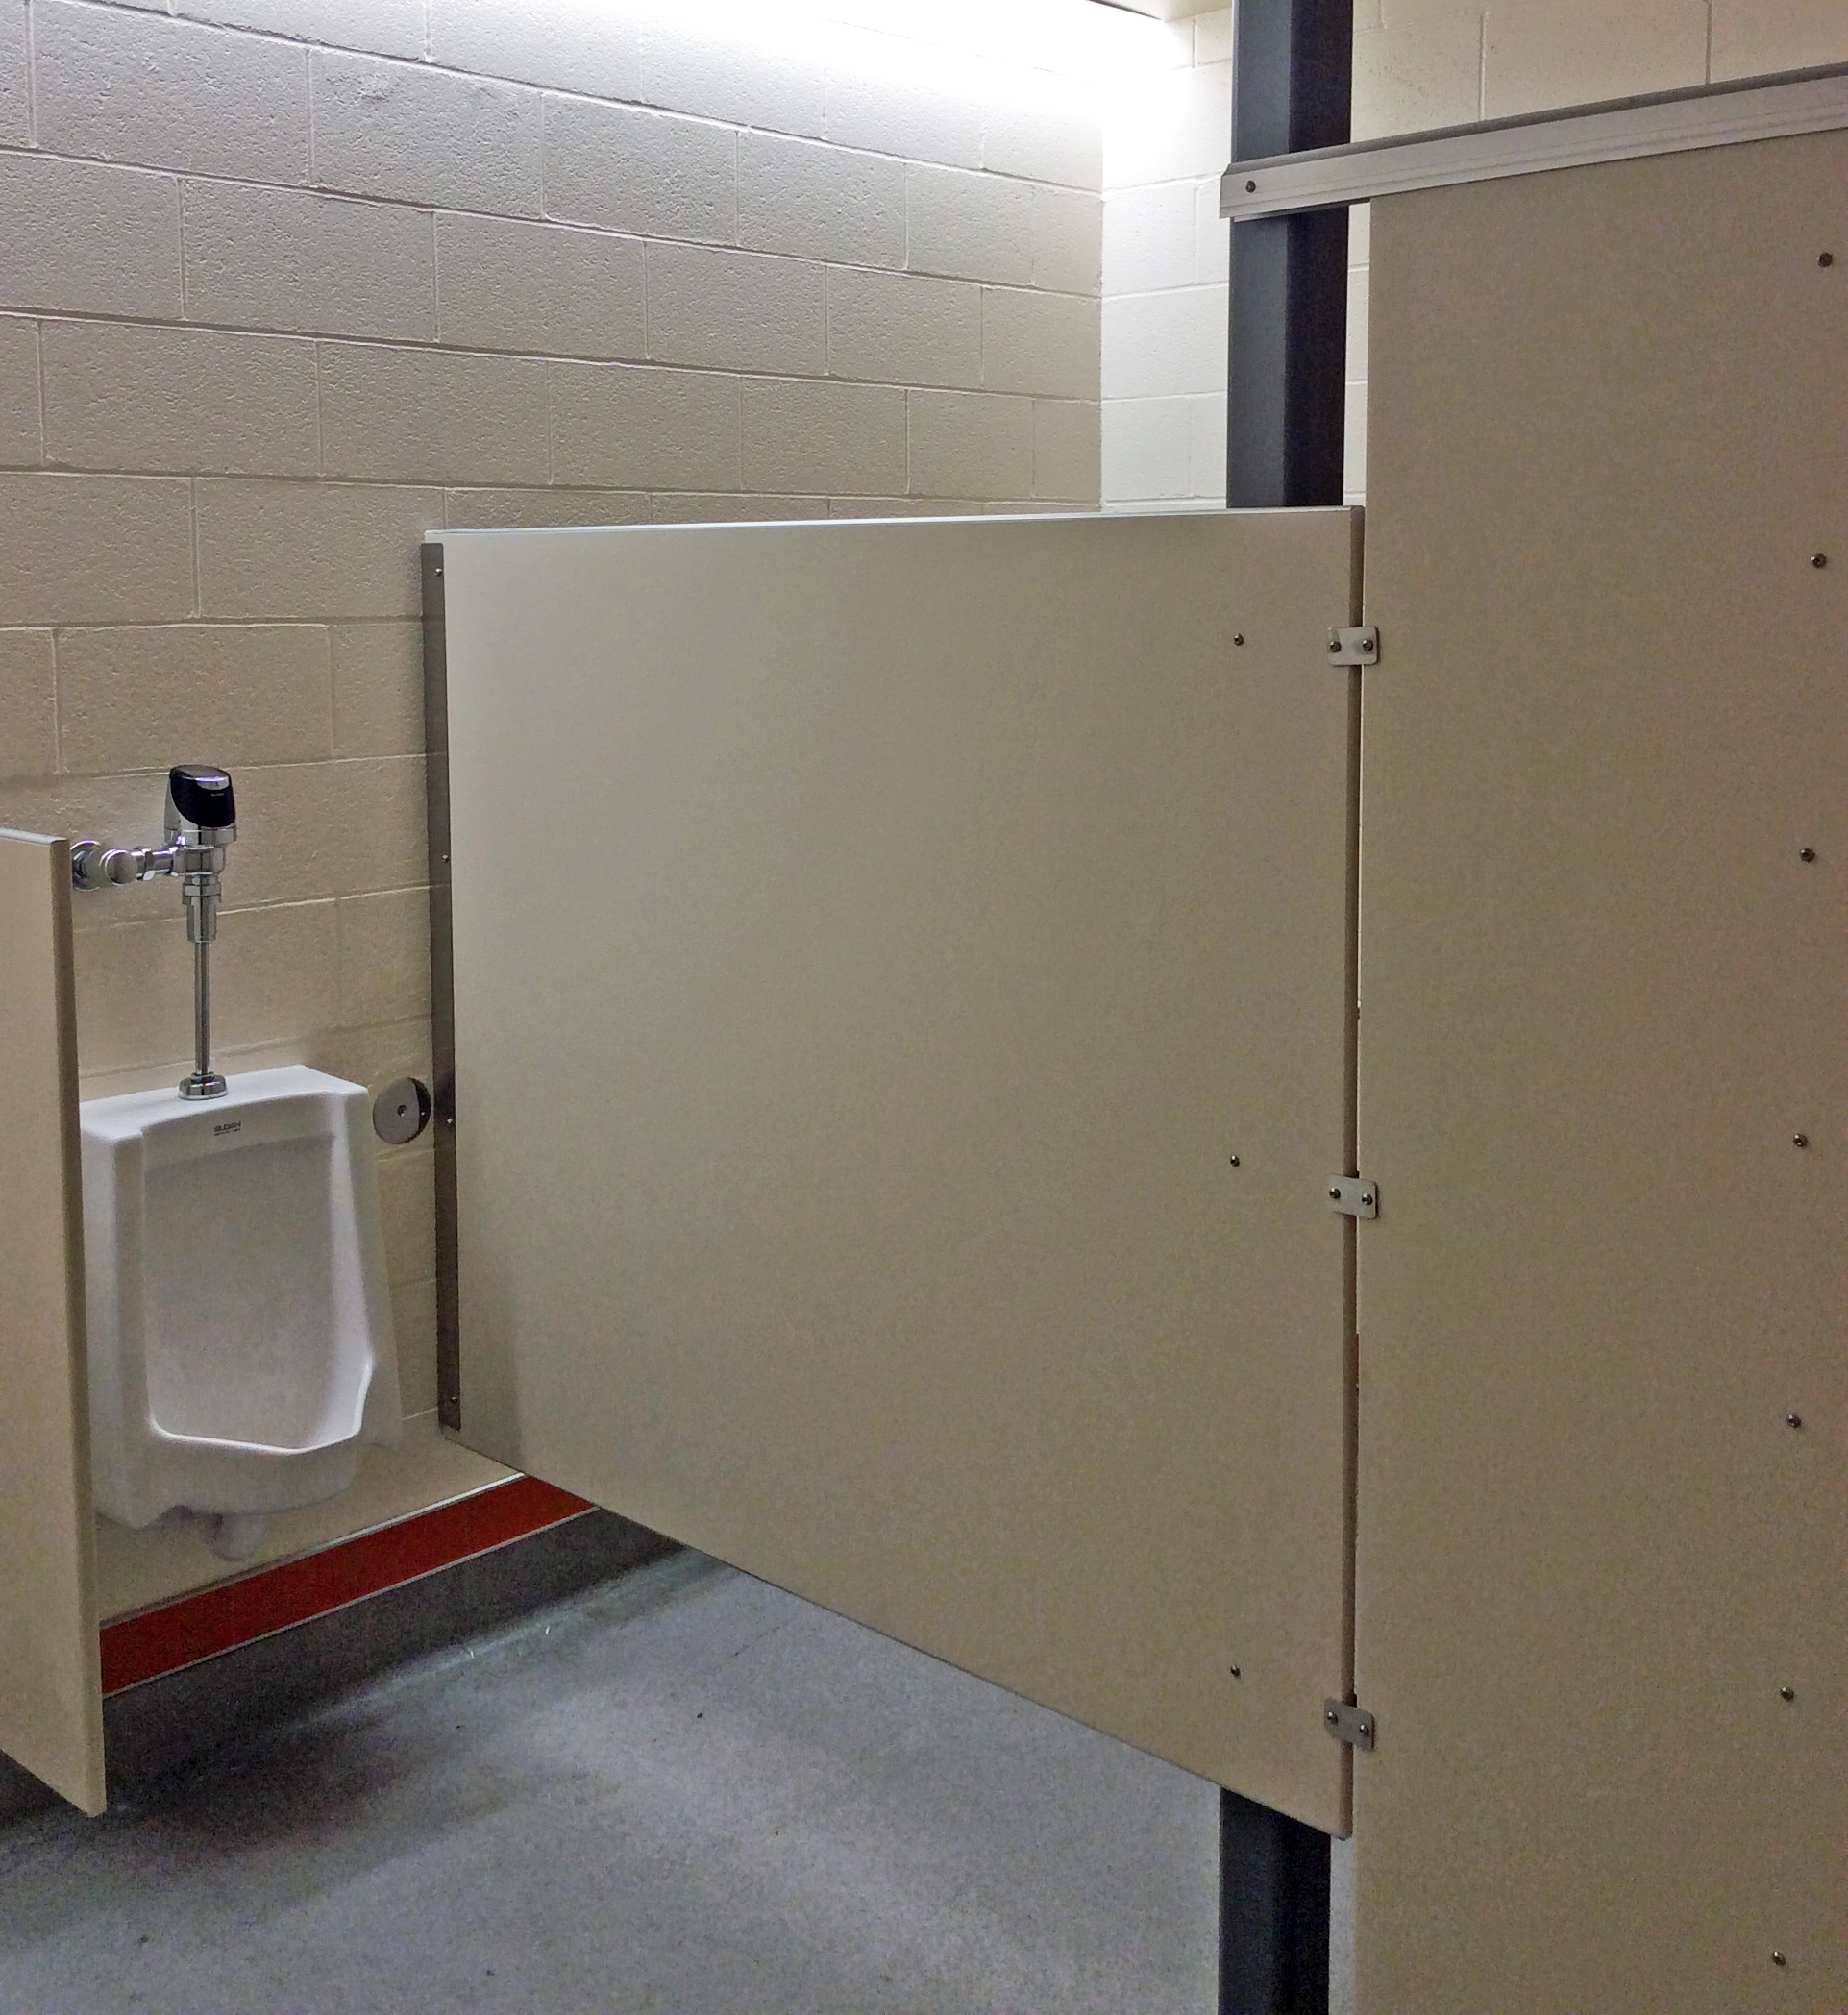 Springfield's Hamlin Middle School features Scranton Products' restroom partitons to stand up to a tough environment.